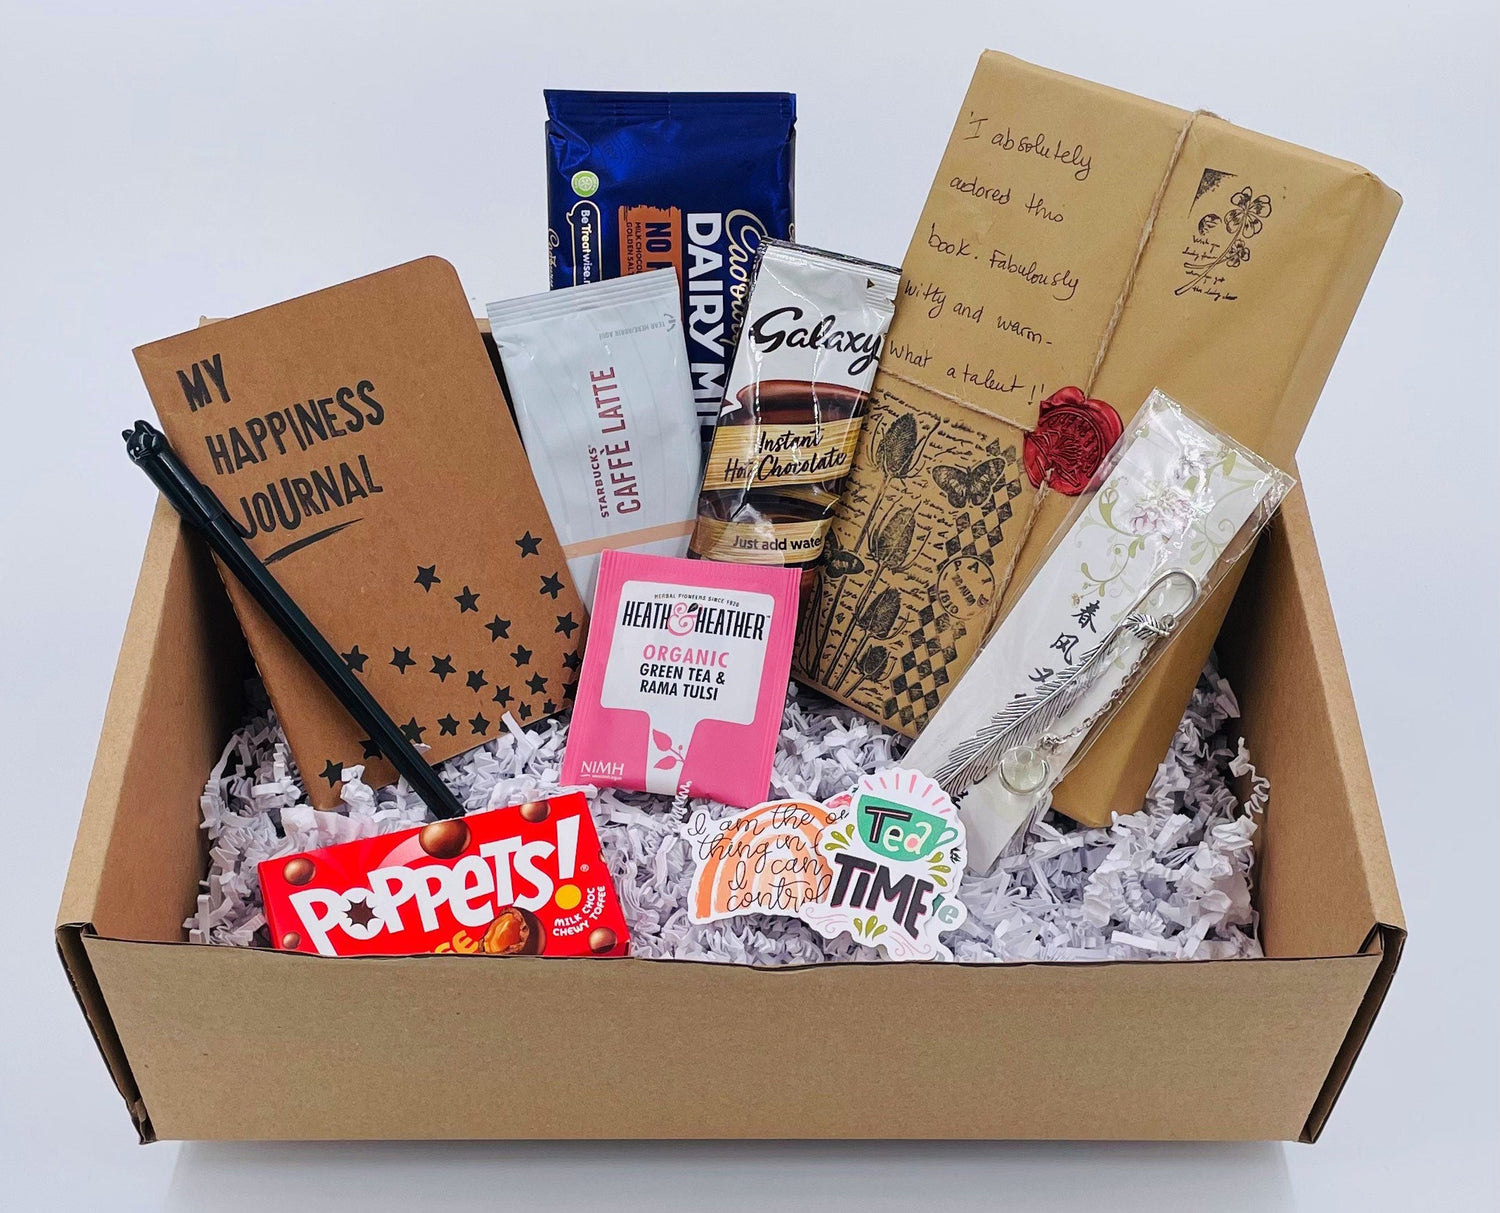 Bookish Blind Date With a Preloved Book Box